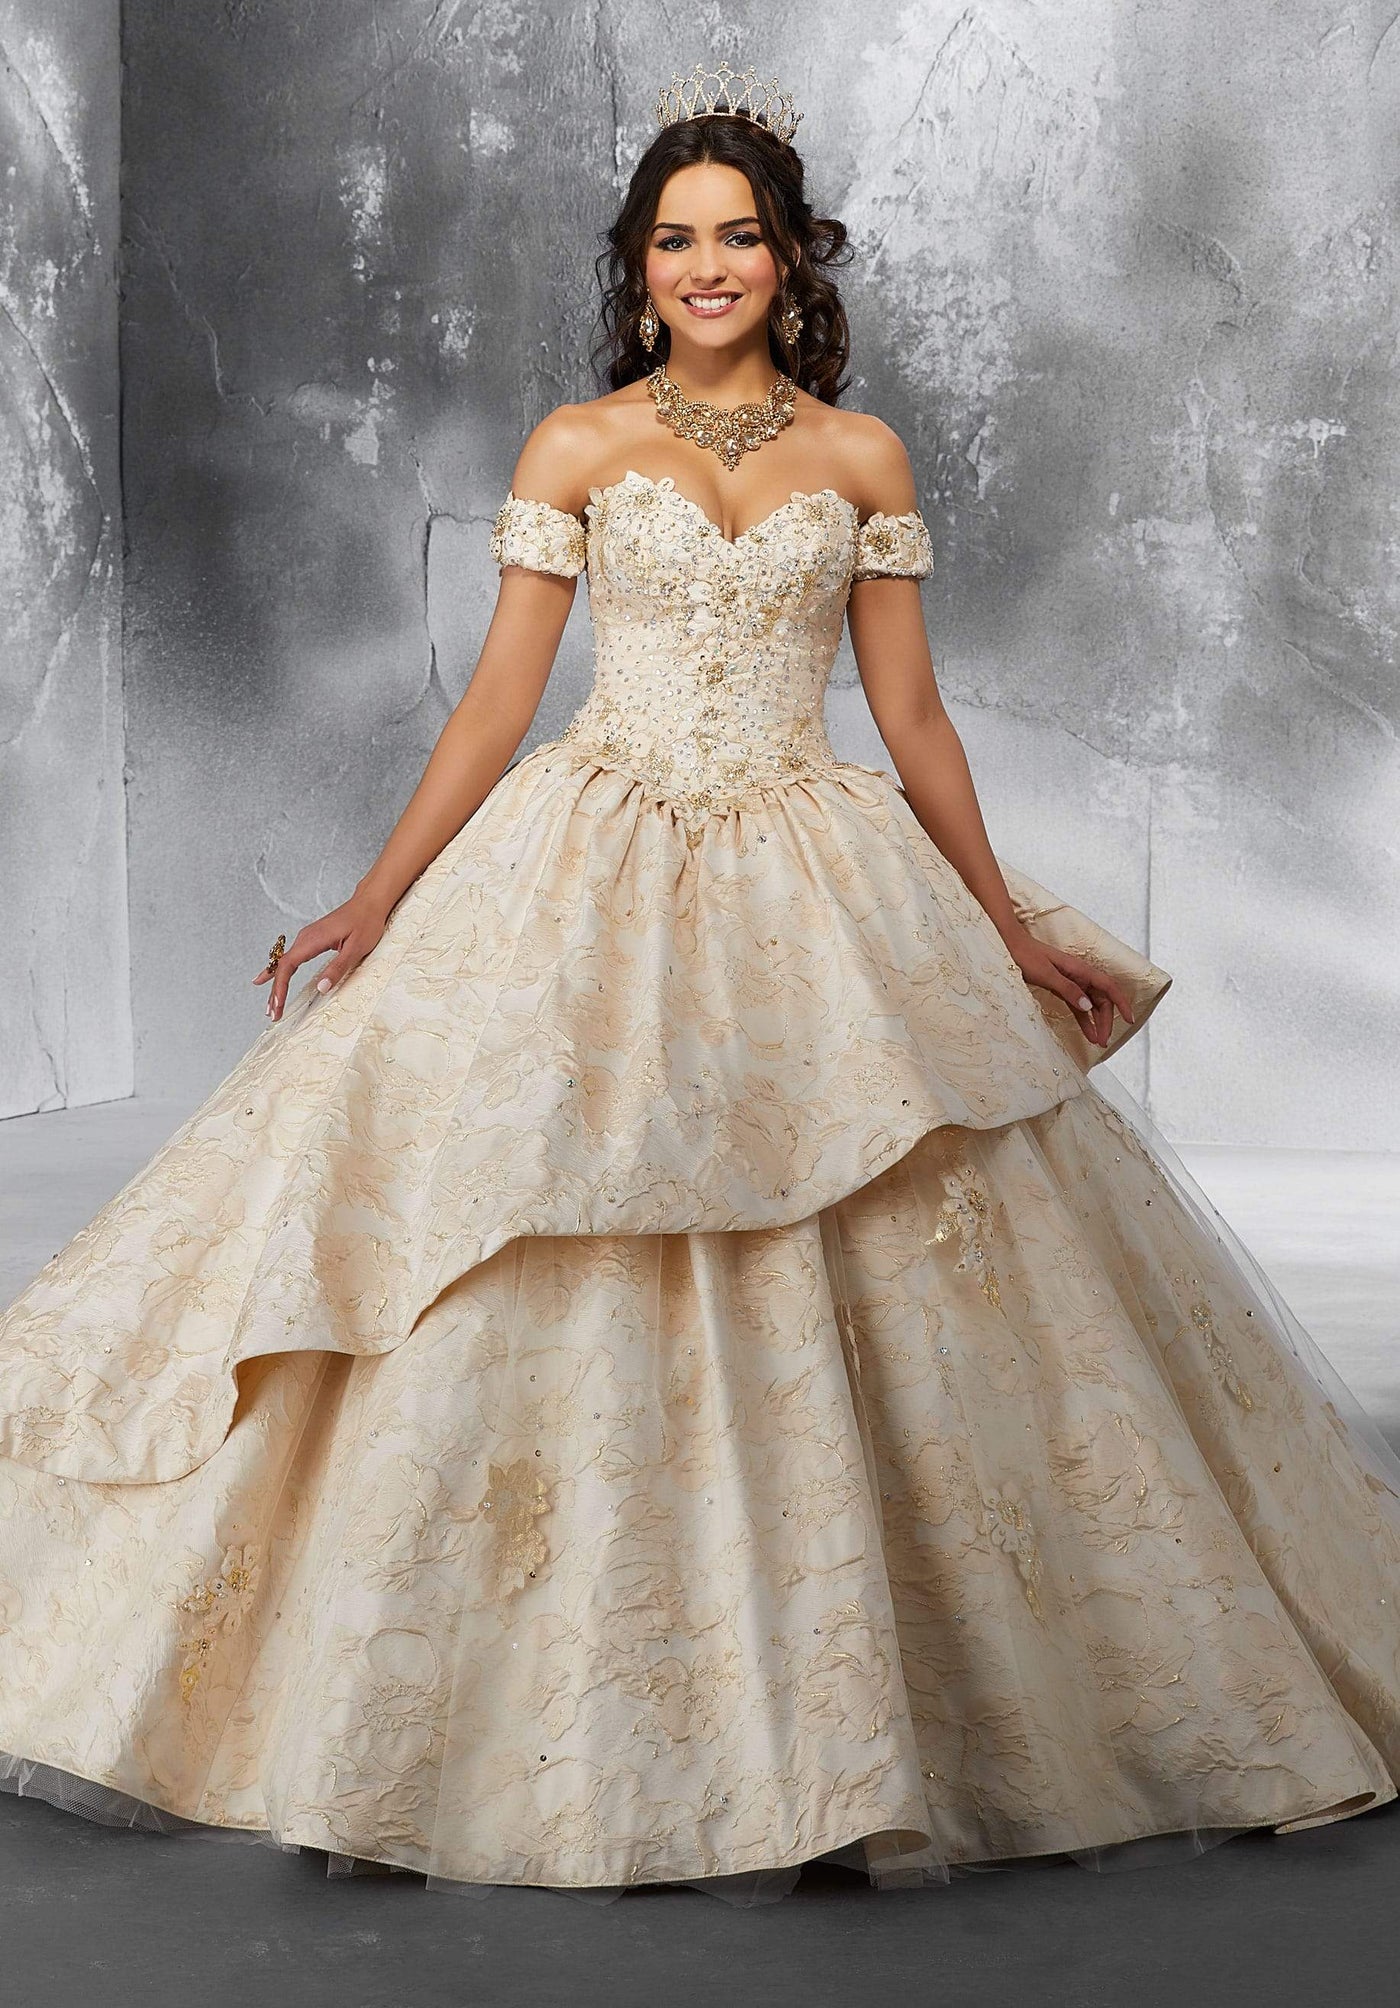 Mary on Tulle Skirt Overlay and Brocade Flounce - MoriLee #89193